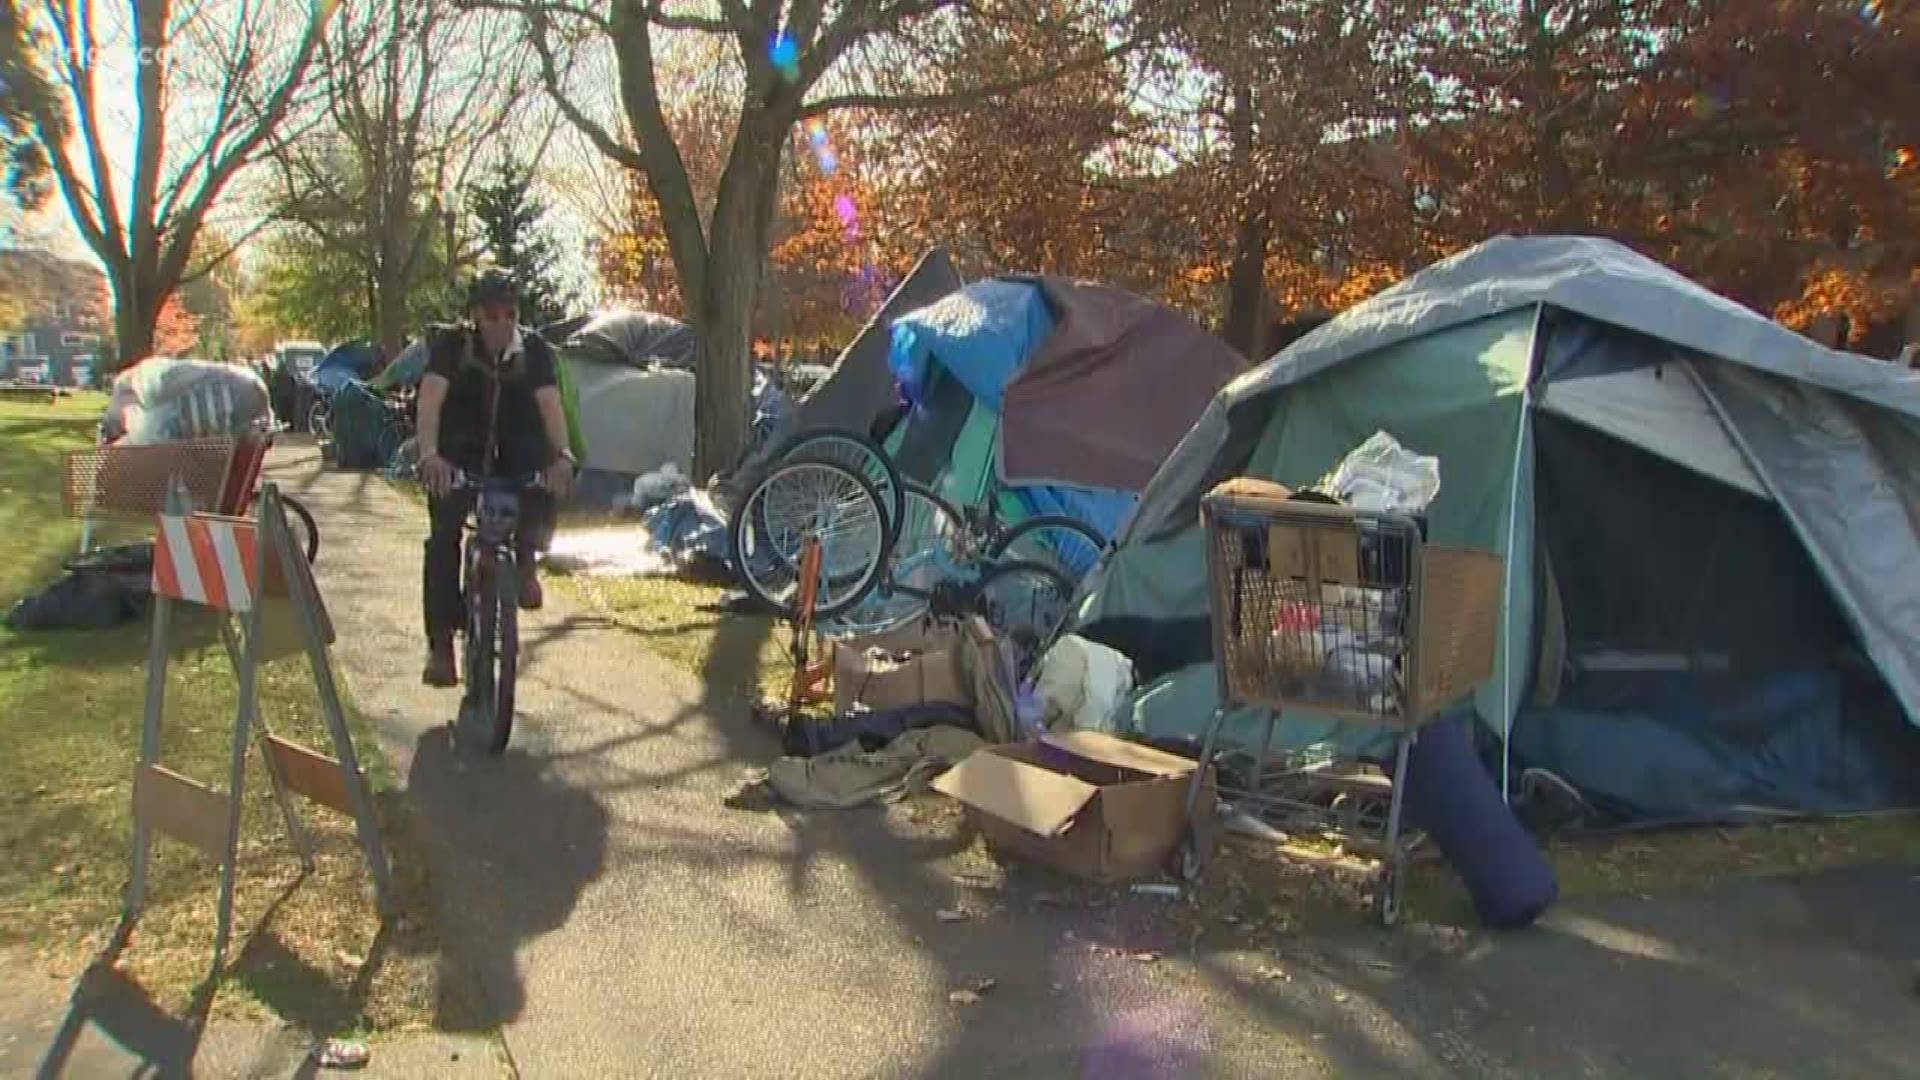 As of December 1, 'tents with walls' will be banned in Tacoma parks. KING 5's Christin Ayers reports on the city's race to find 400 beds for the homeless.